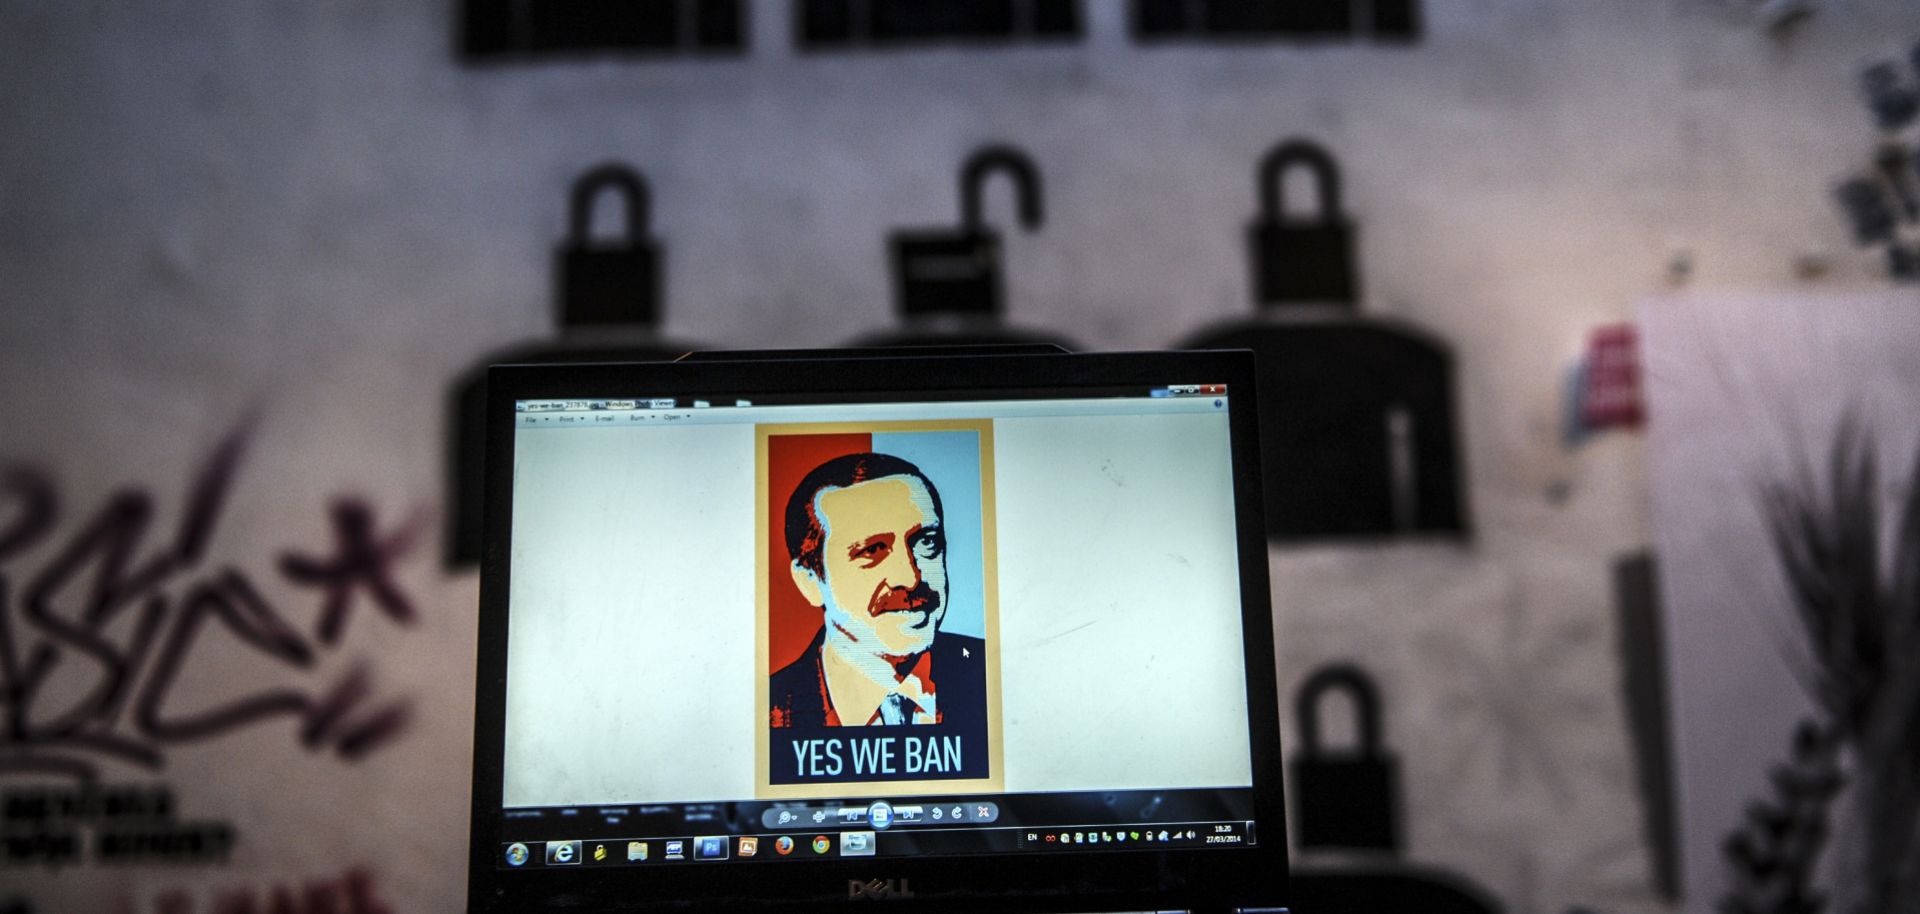 A laptop screen in Istanbul shows an image of Turkish President Recep Tayyip Erdogan emblazoned with the slogan "Yes We Ban," a play on former U.S. President Barack Obama's campaign iconography.